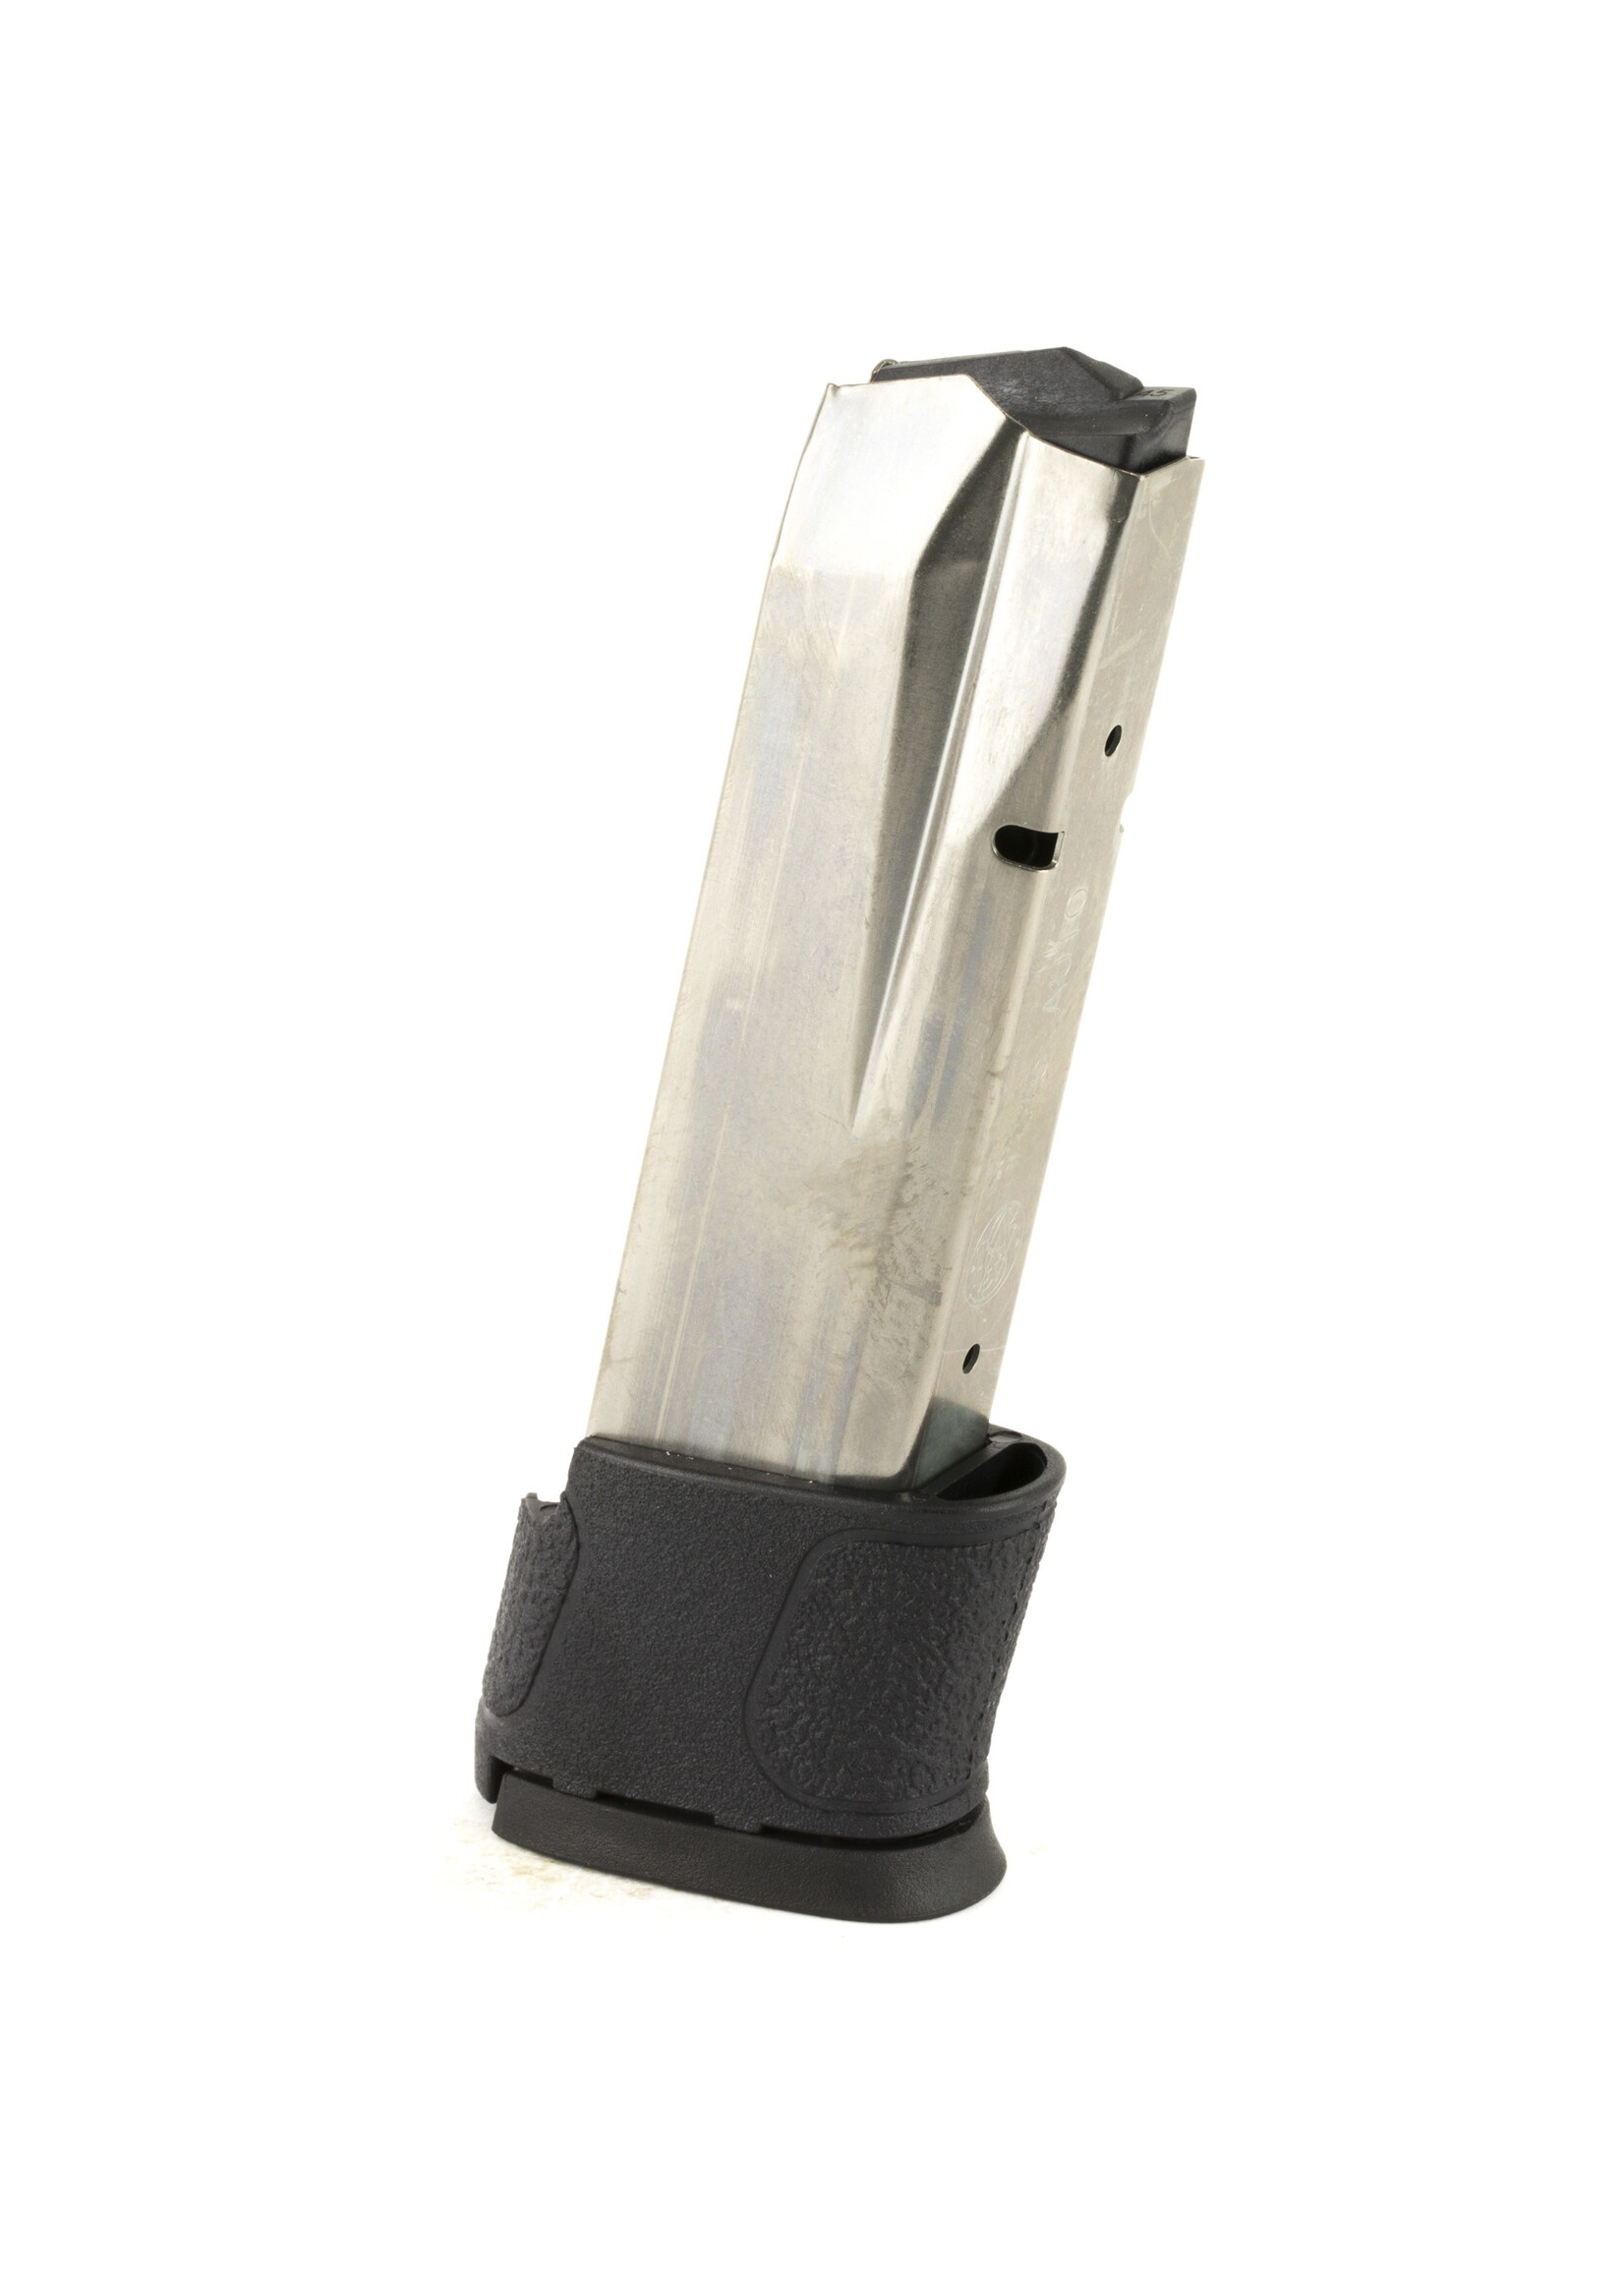 SMITH & WESSON SMITH & WESSON M&P45 14RD MAGAZINE